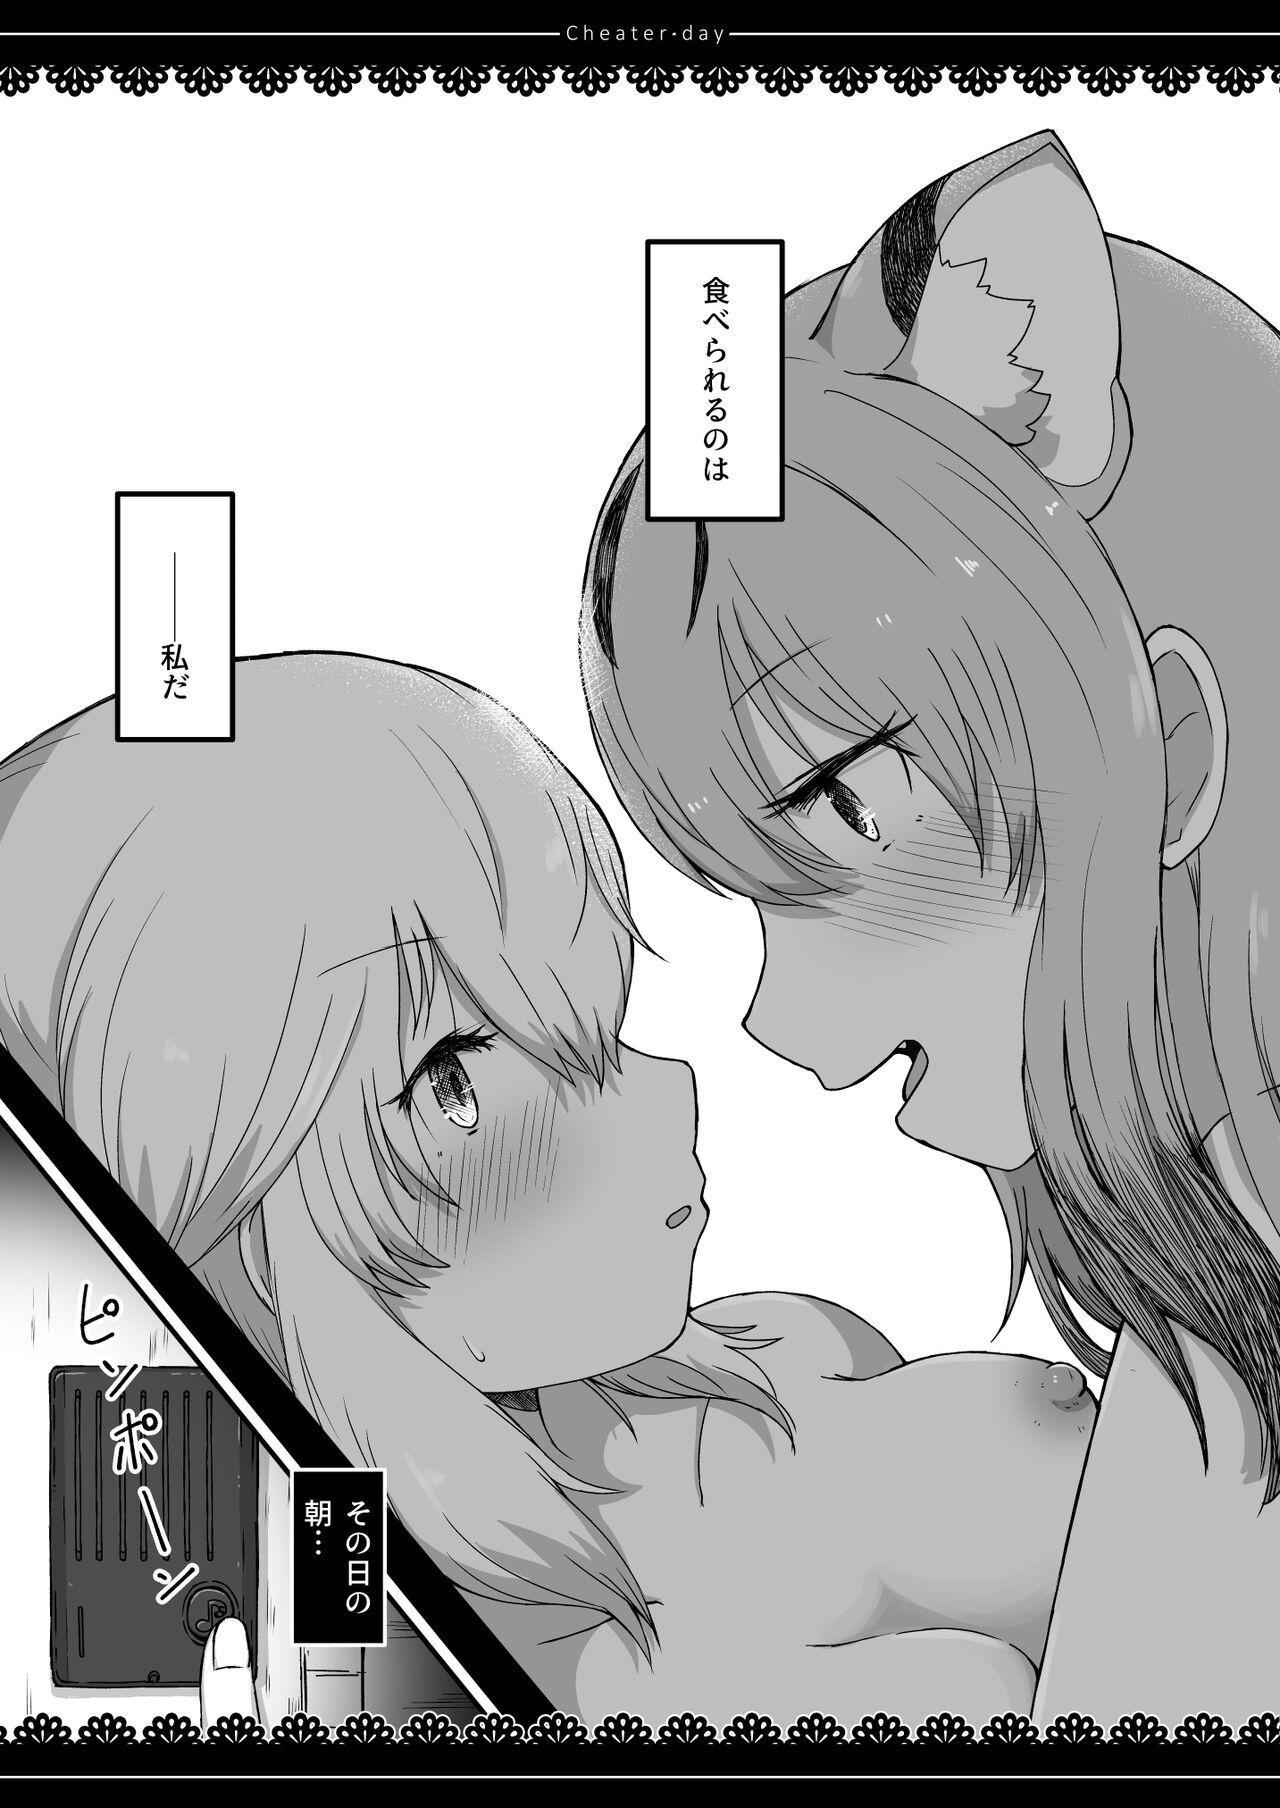 Kink Cheater day - Kemono friends Anal Licking - Page 5